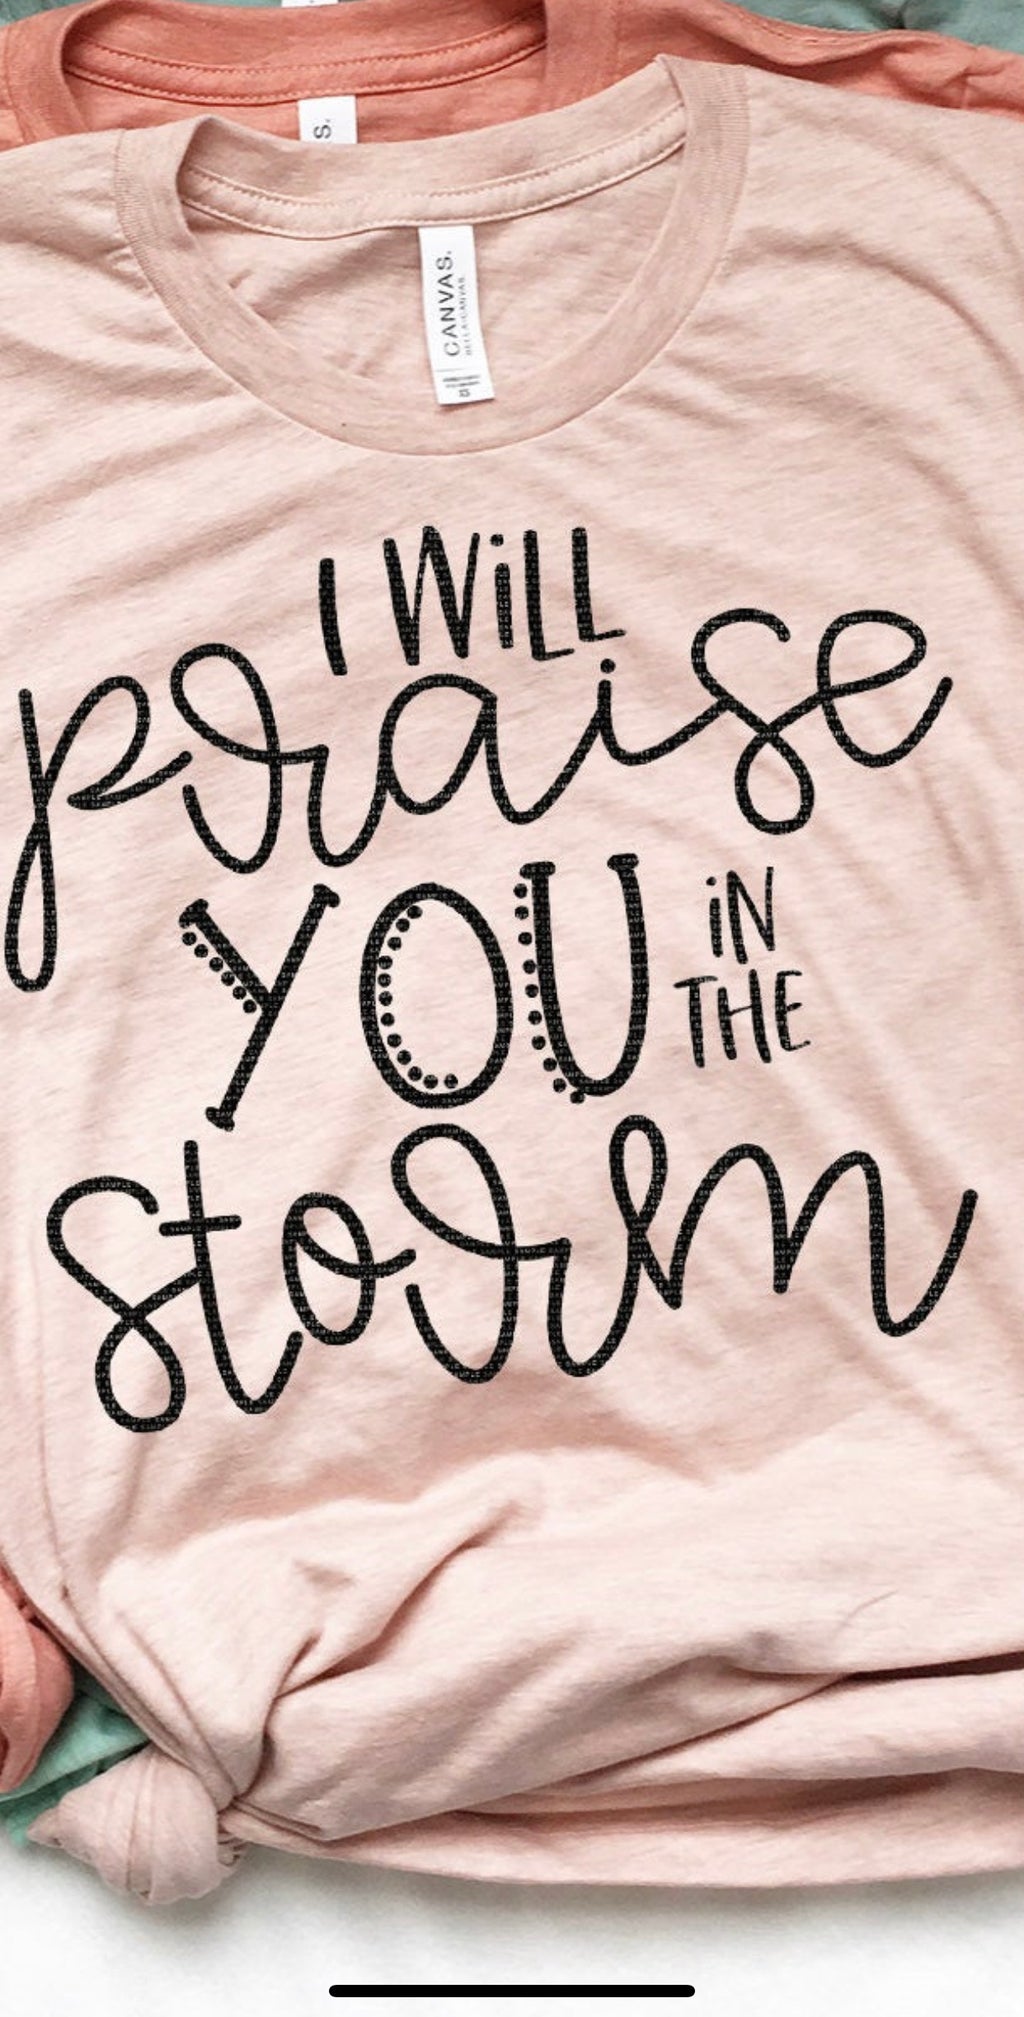 I will praise him in the storm